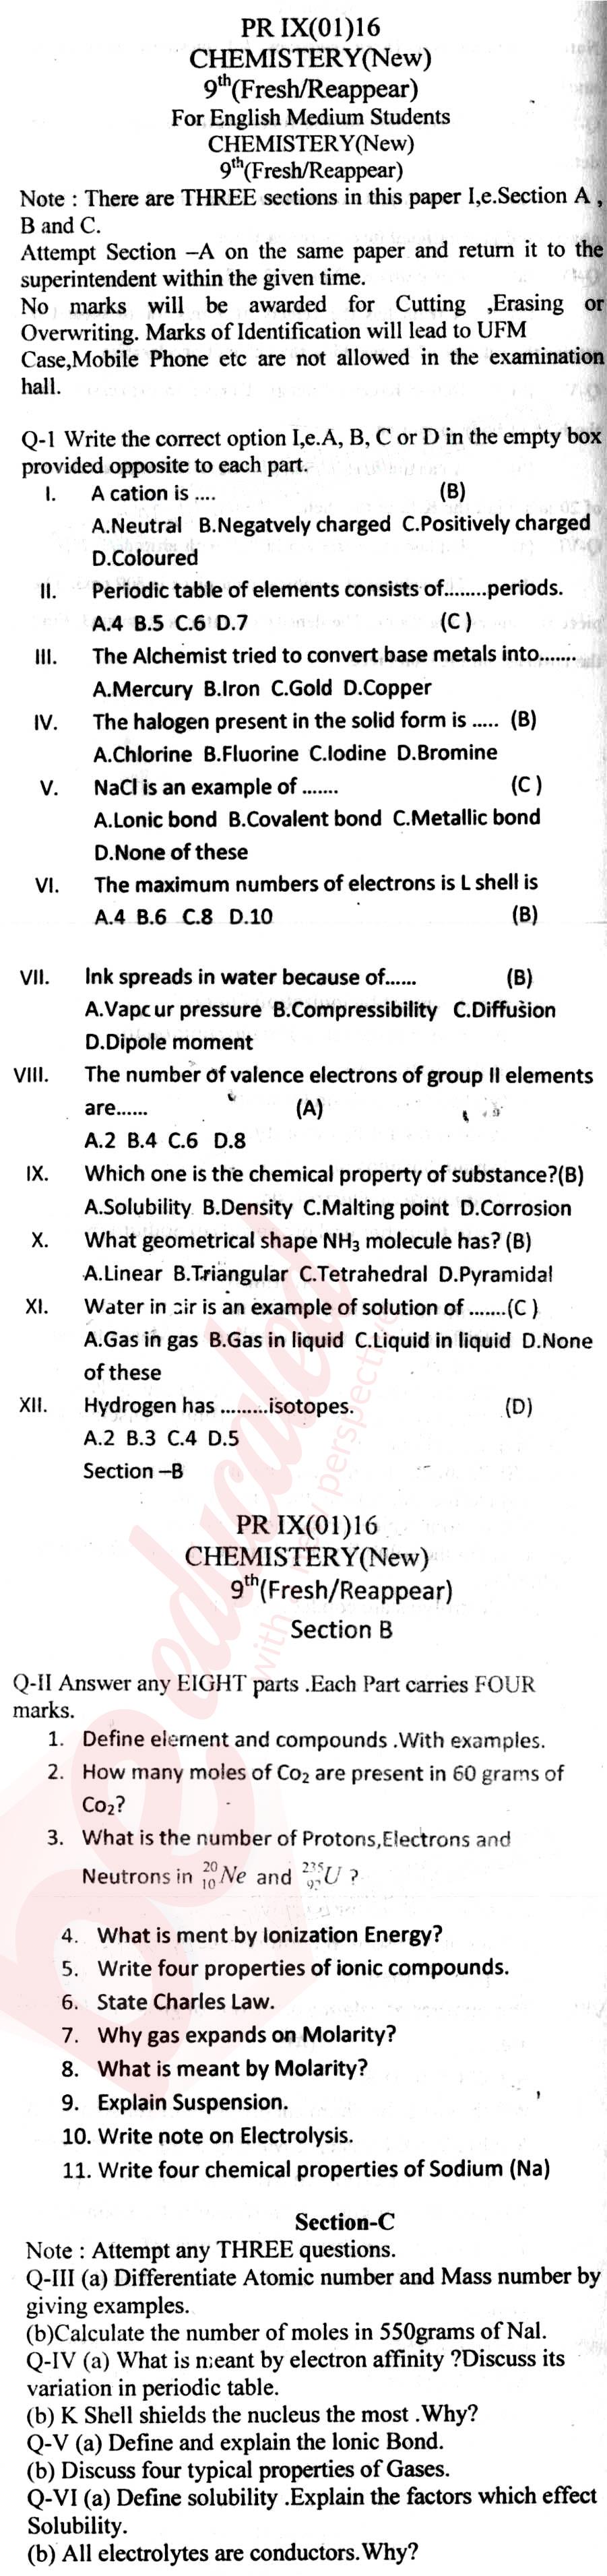 Chemistry 9th English Medium Past Paper Group 1 BISE Abbottabad 2016